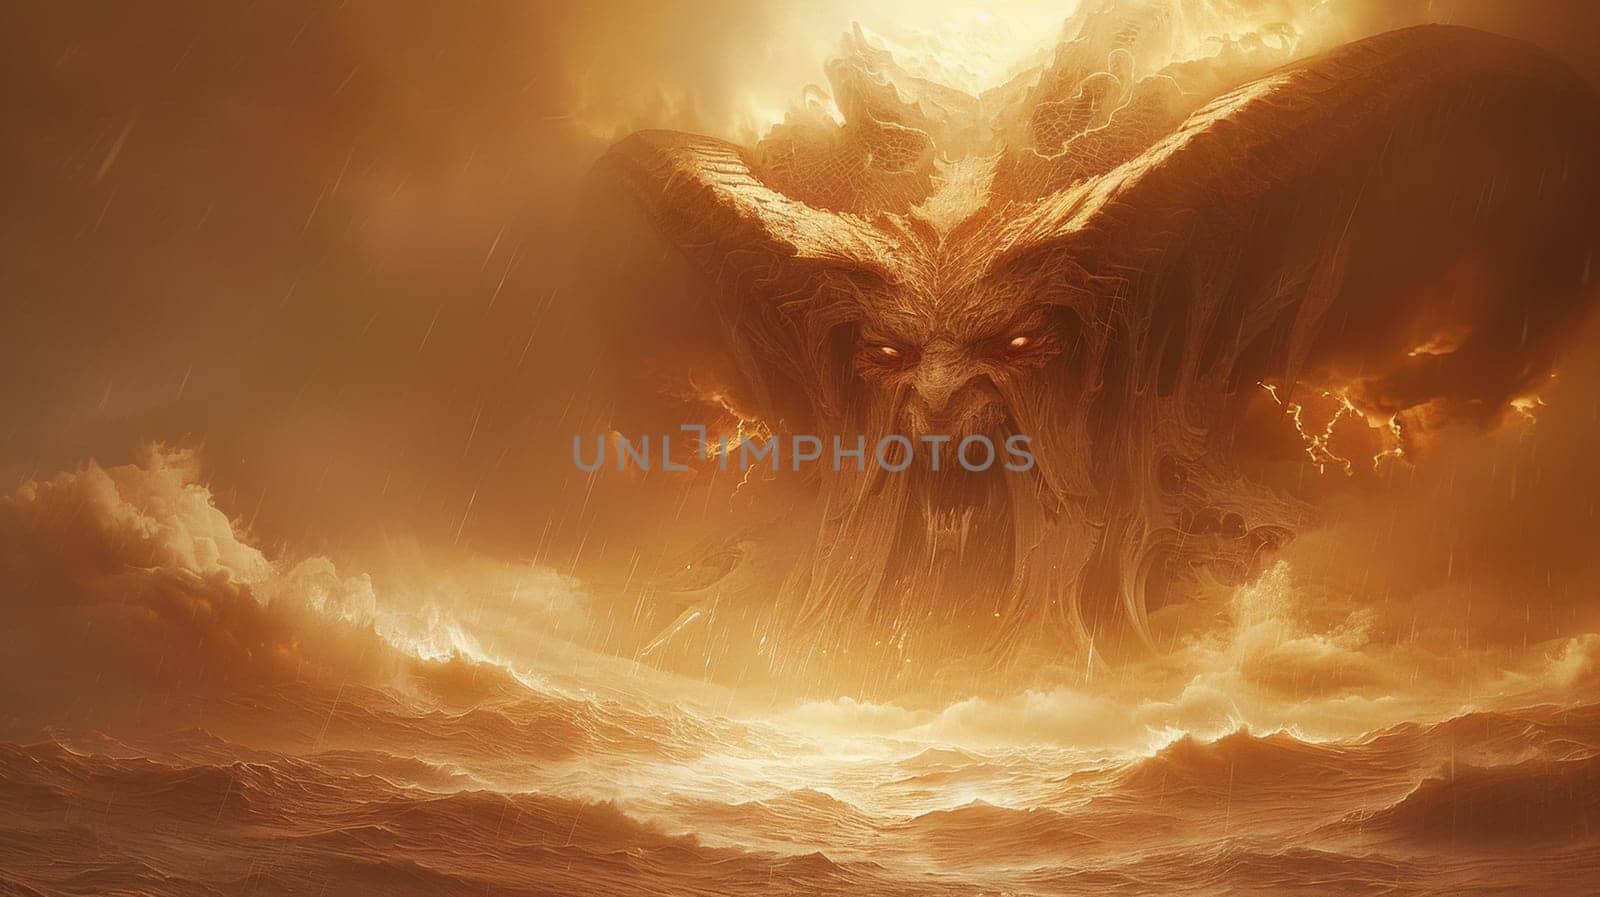 A large demon with a face of fire is standing on top of the ocean